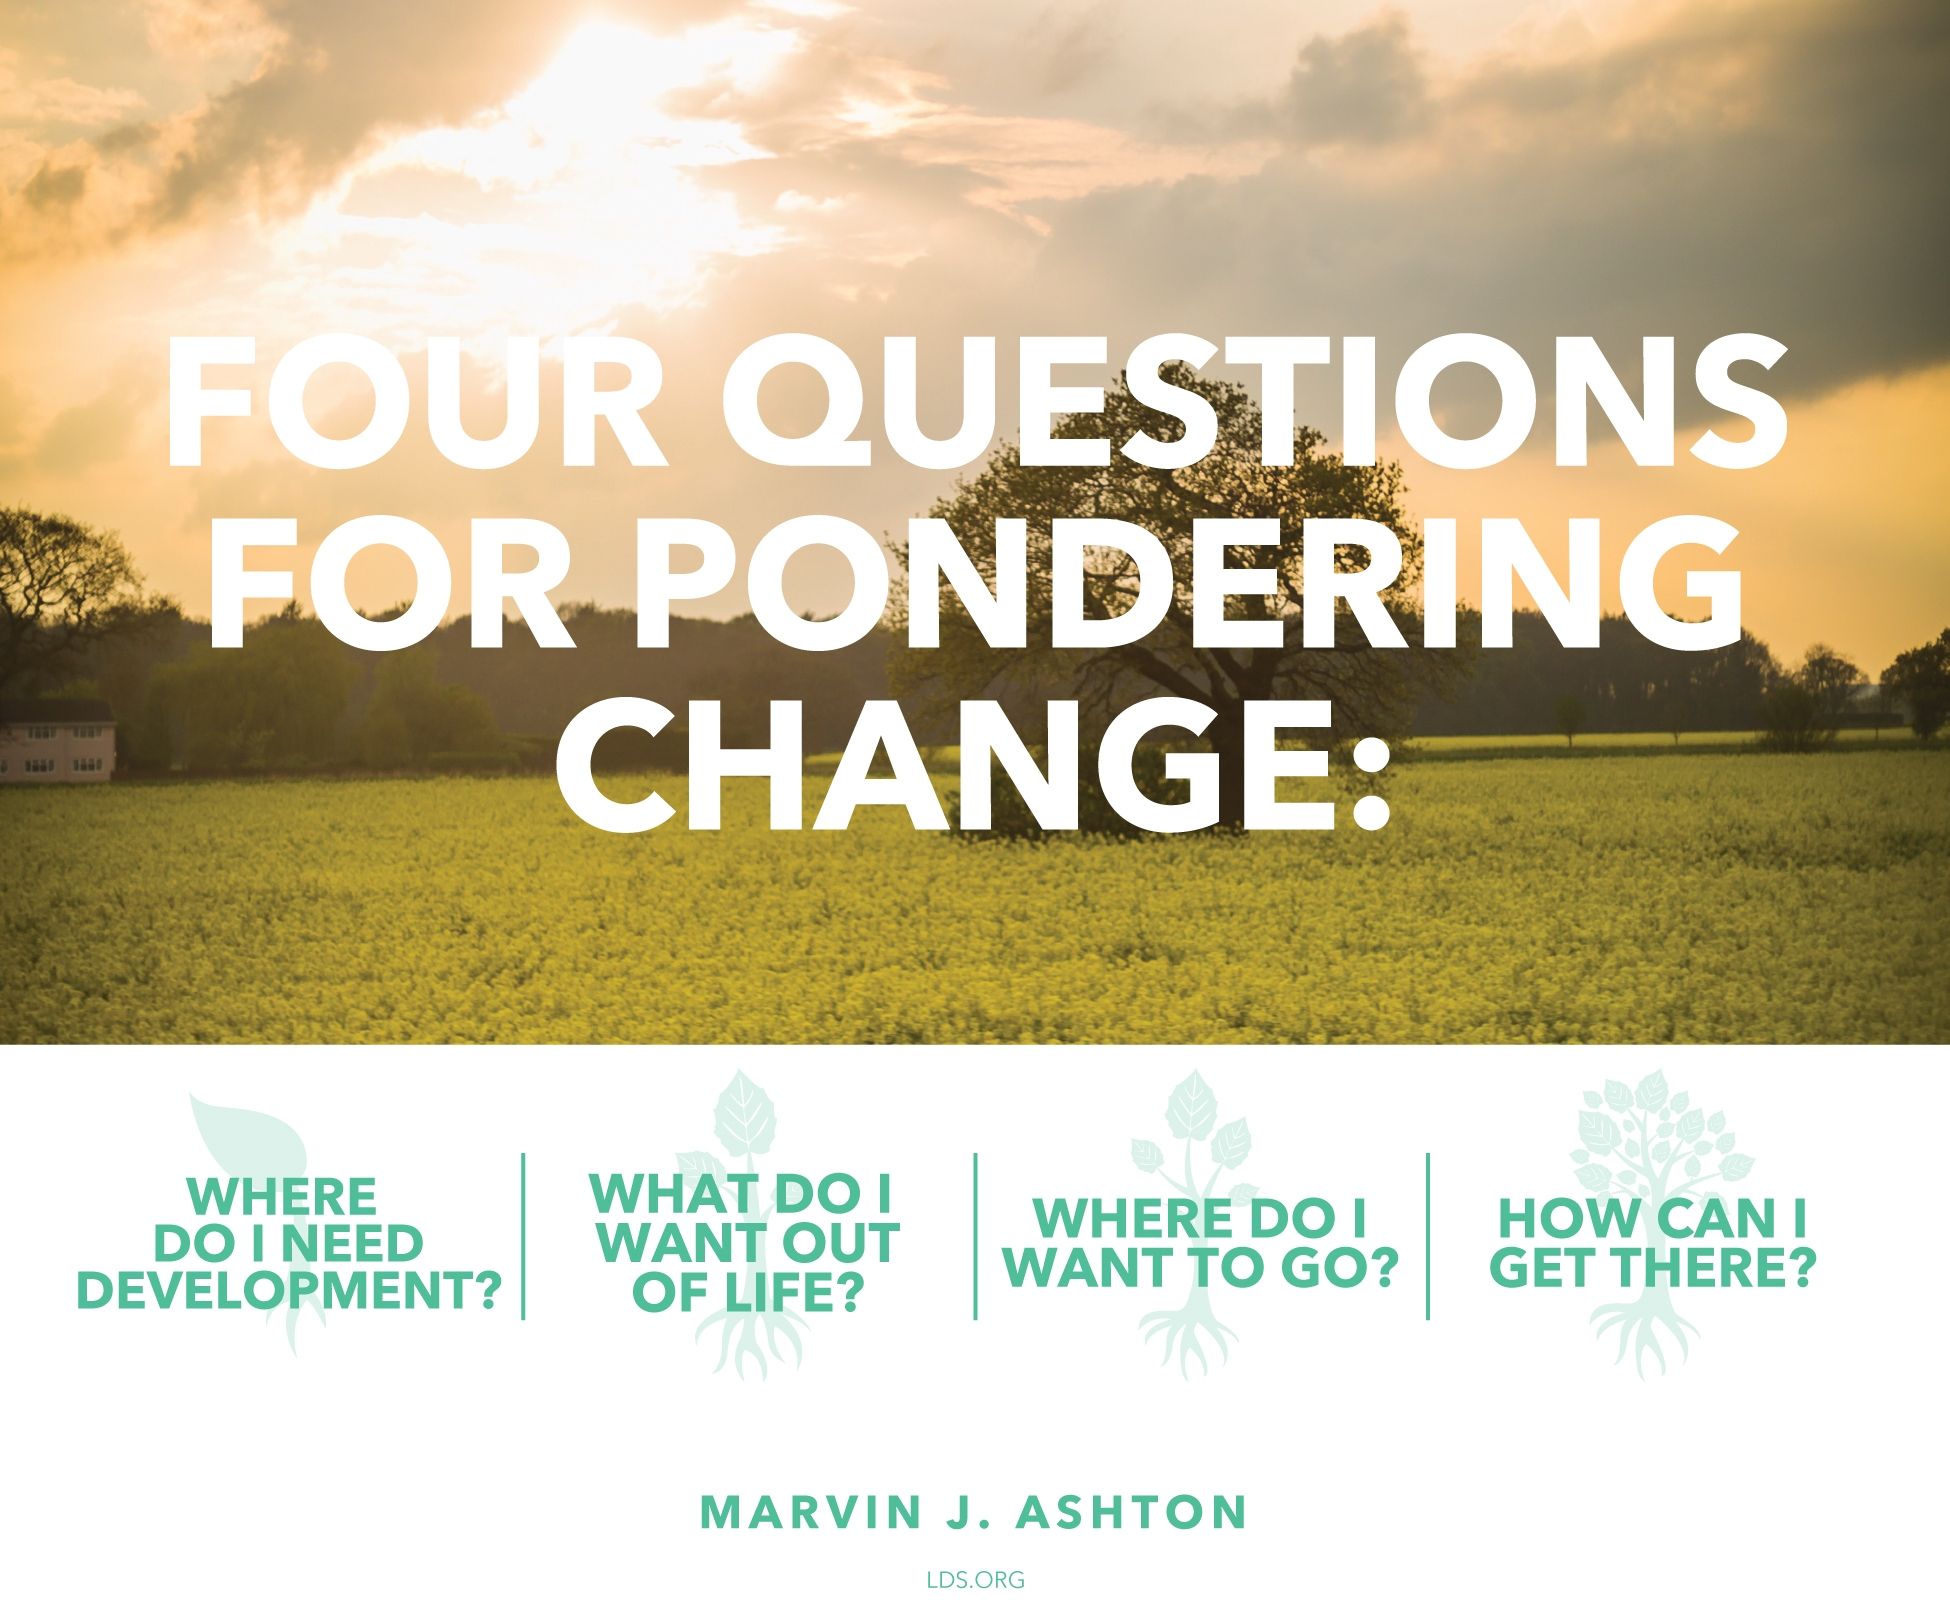 Four questions for pondering change: “Where do I need development? What do I want out of life? Where do I want to go? How can I get there?”—Elder Marvin J. Ashton, “Progress through Change”